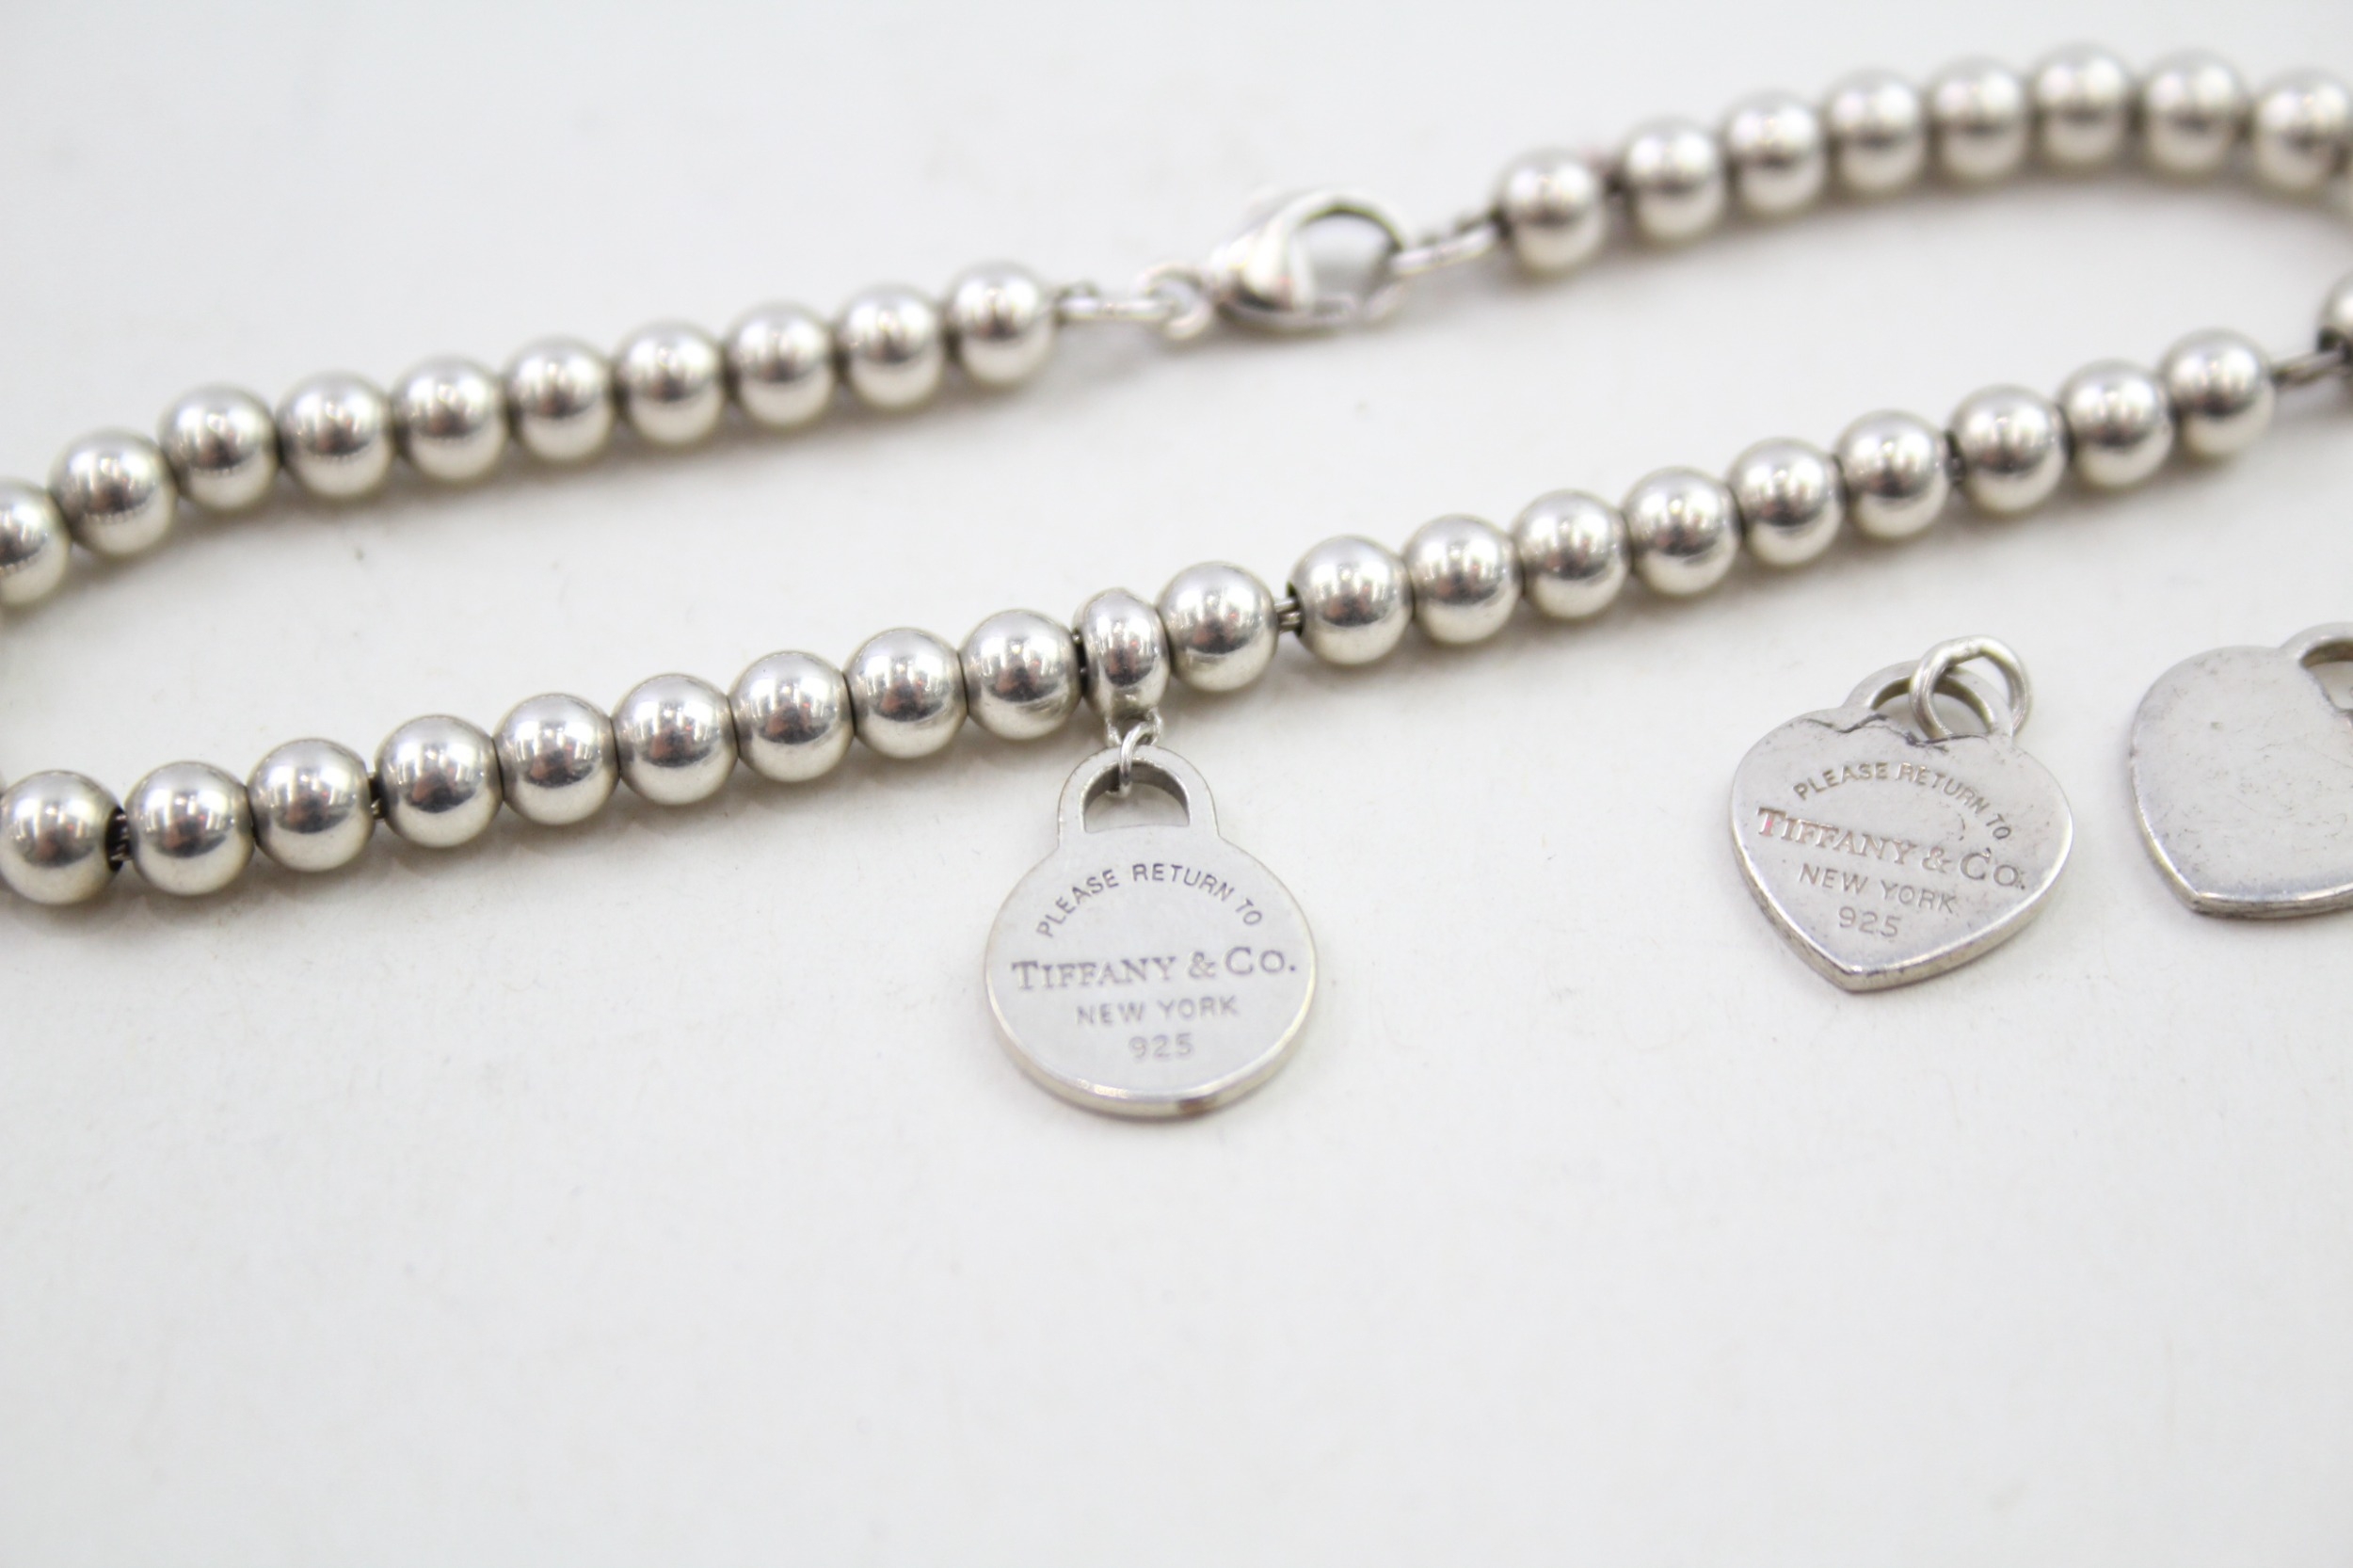 Silver bracelet and pendants/charms by designer Tiffany & Co (7g) - Image 2 of 4